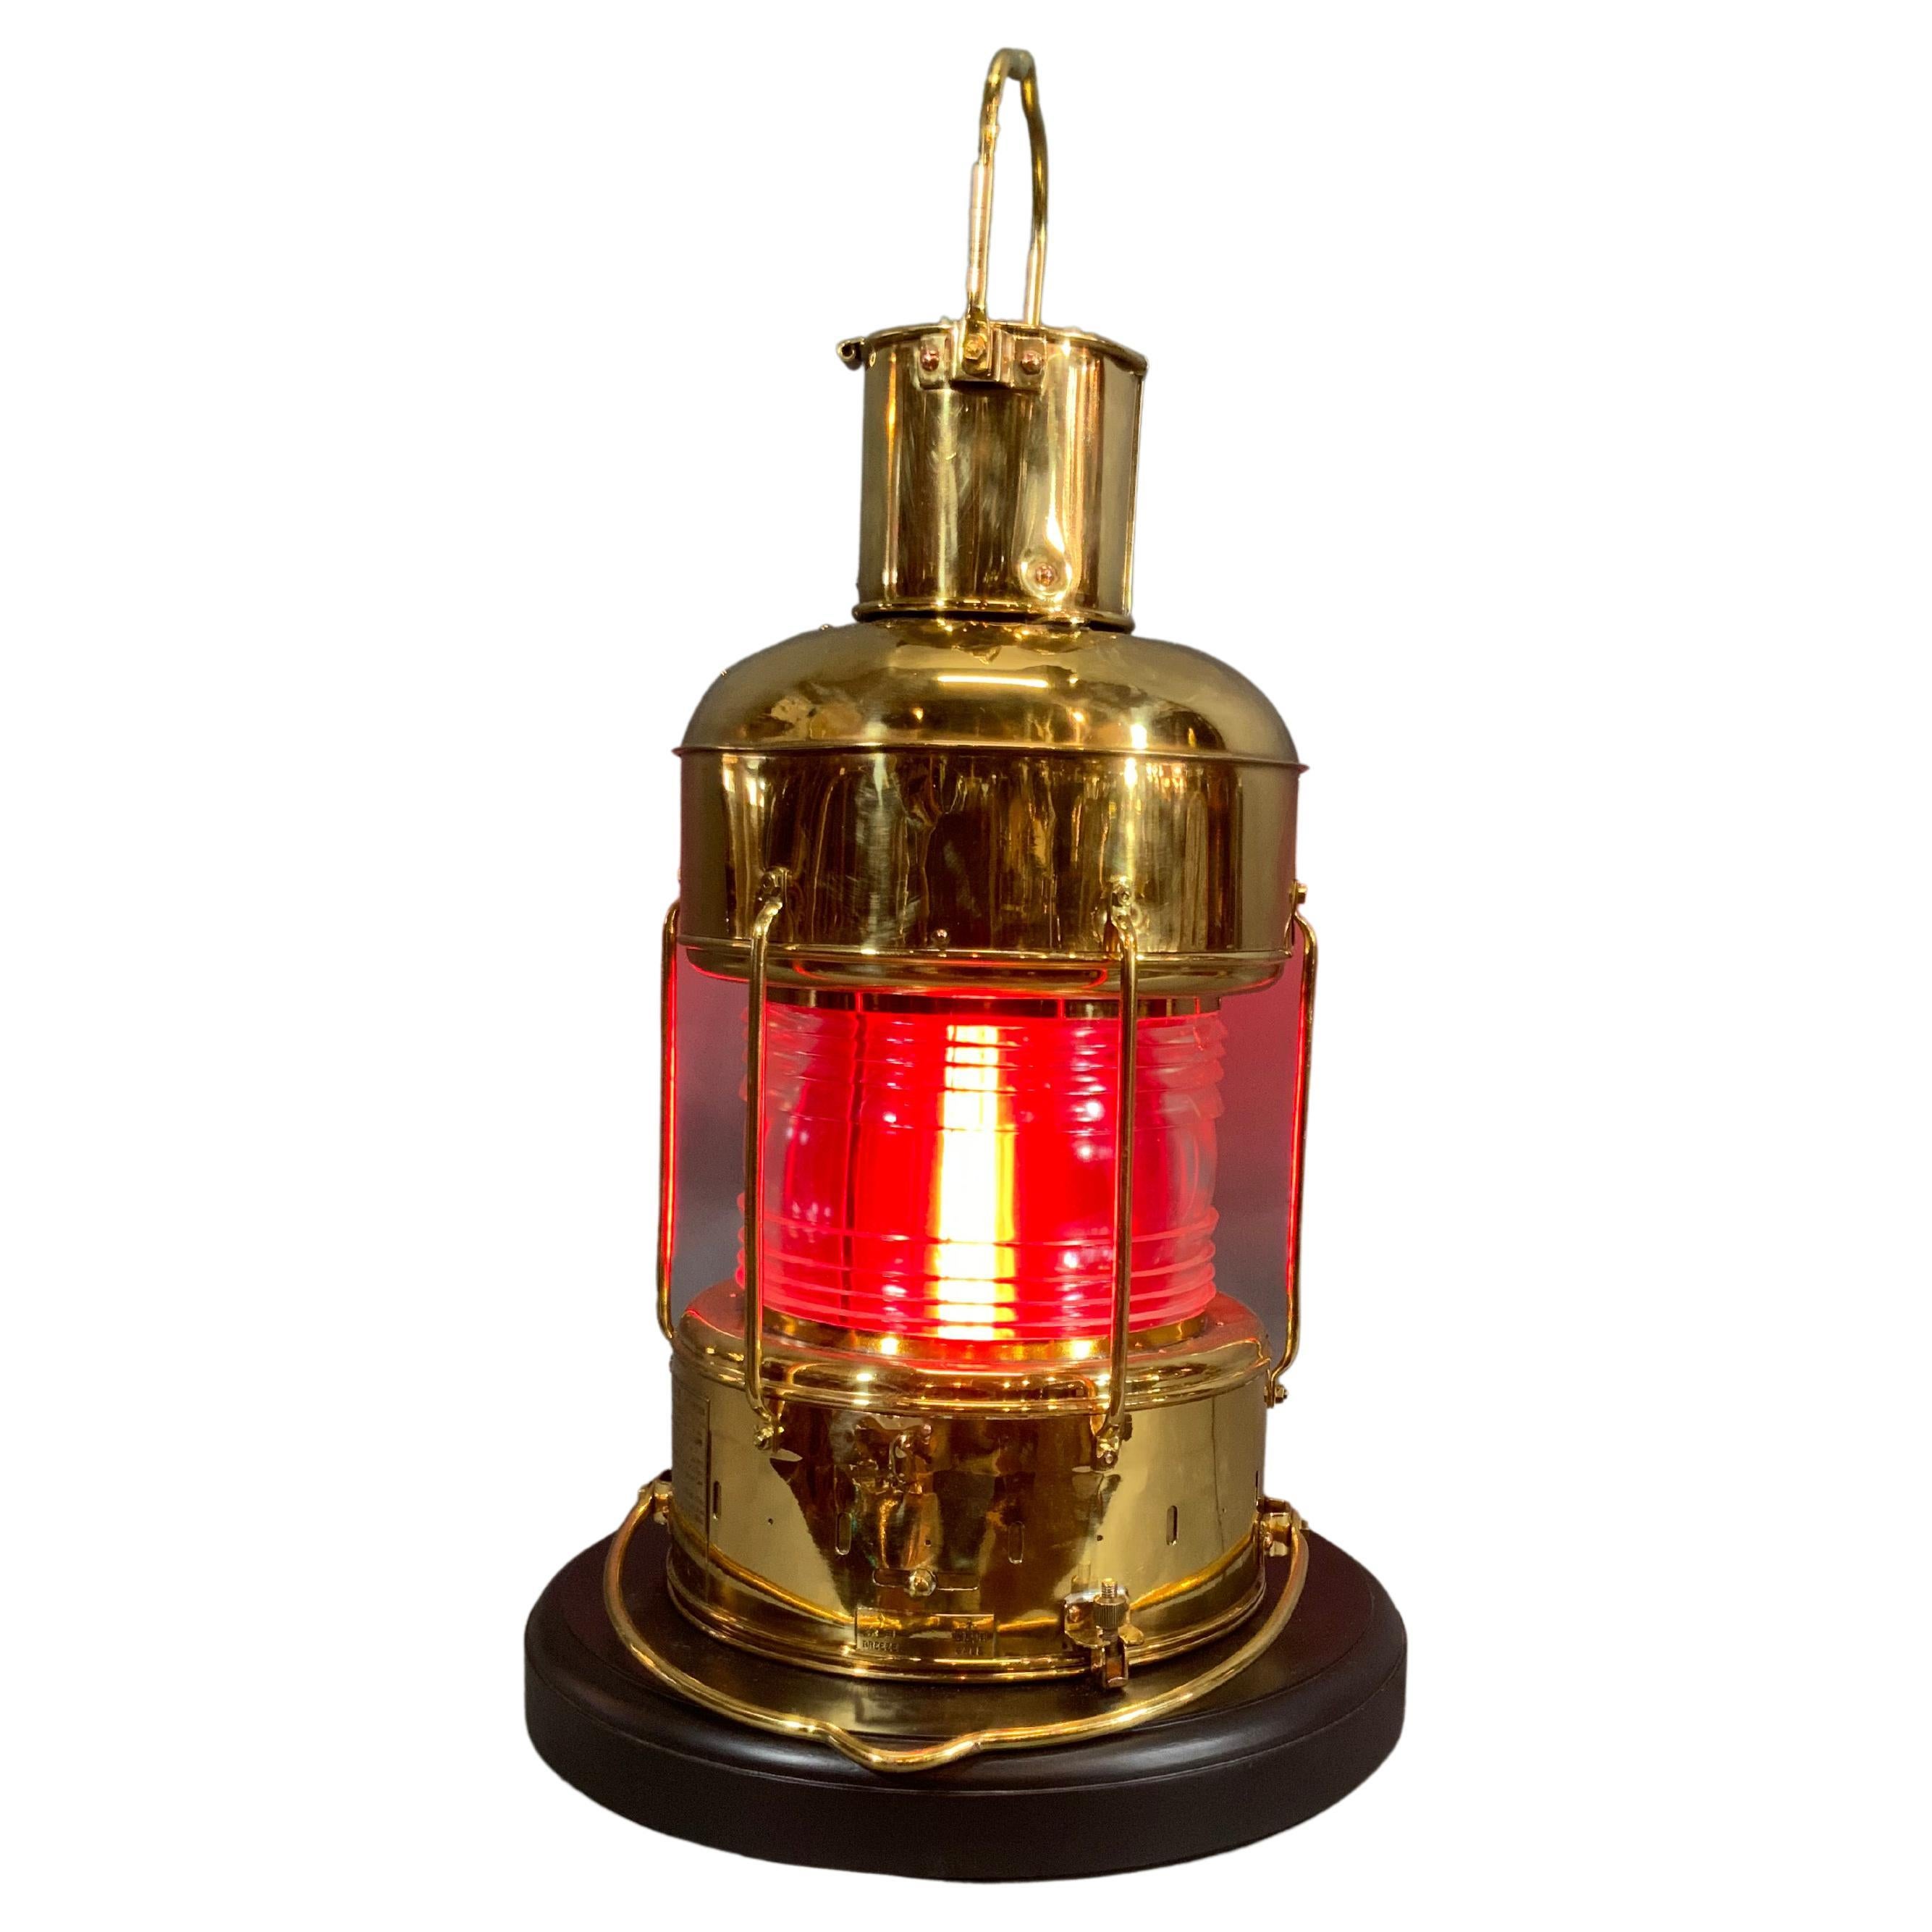 Ship's Anchor Lantern of Copper and Brass with Fresnel Glass Lens